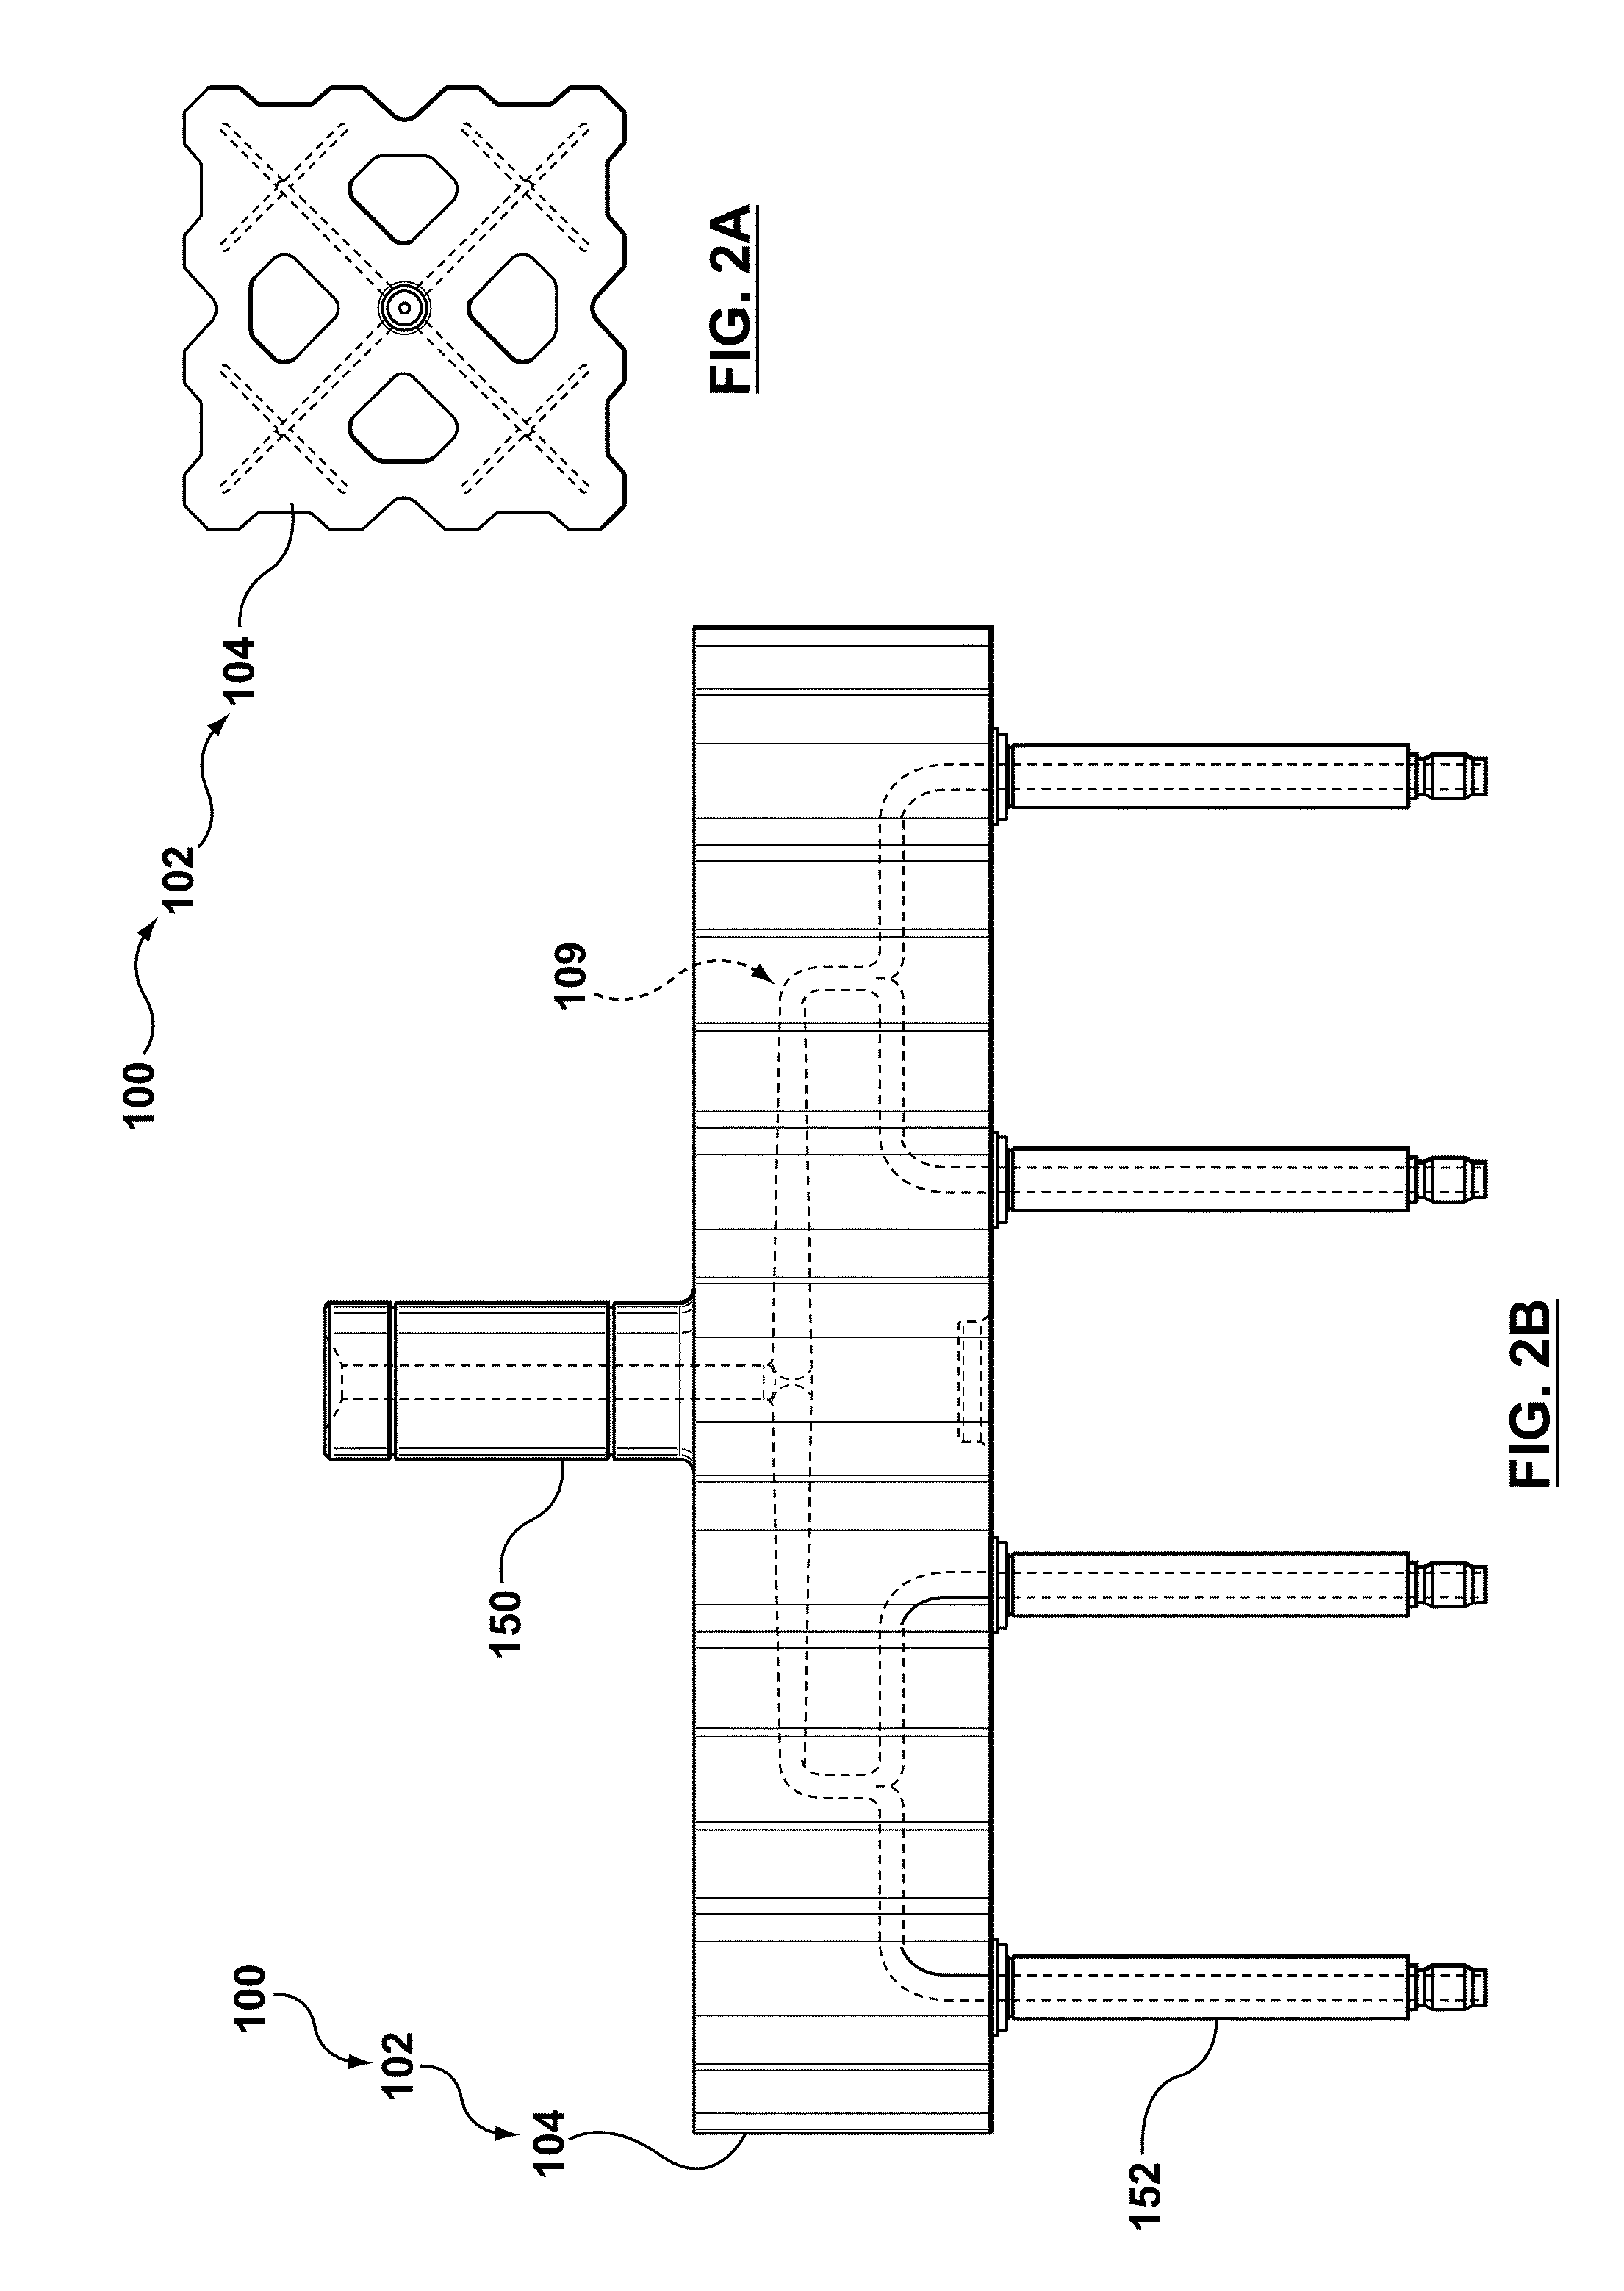 Multi-Property Injection Molding Nozzle for Hot-Runner System